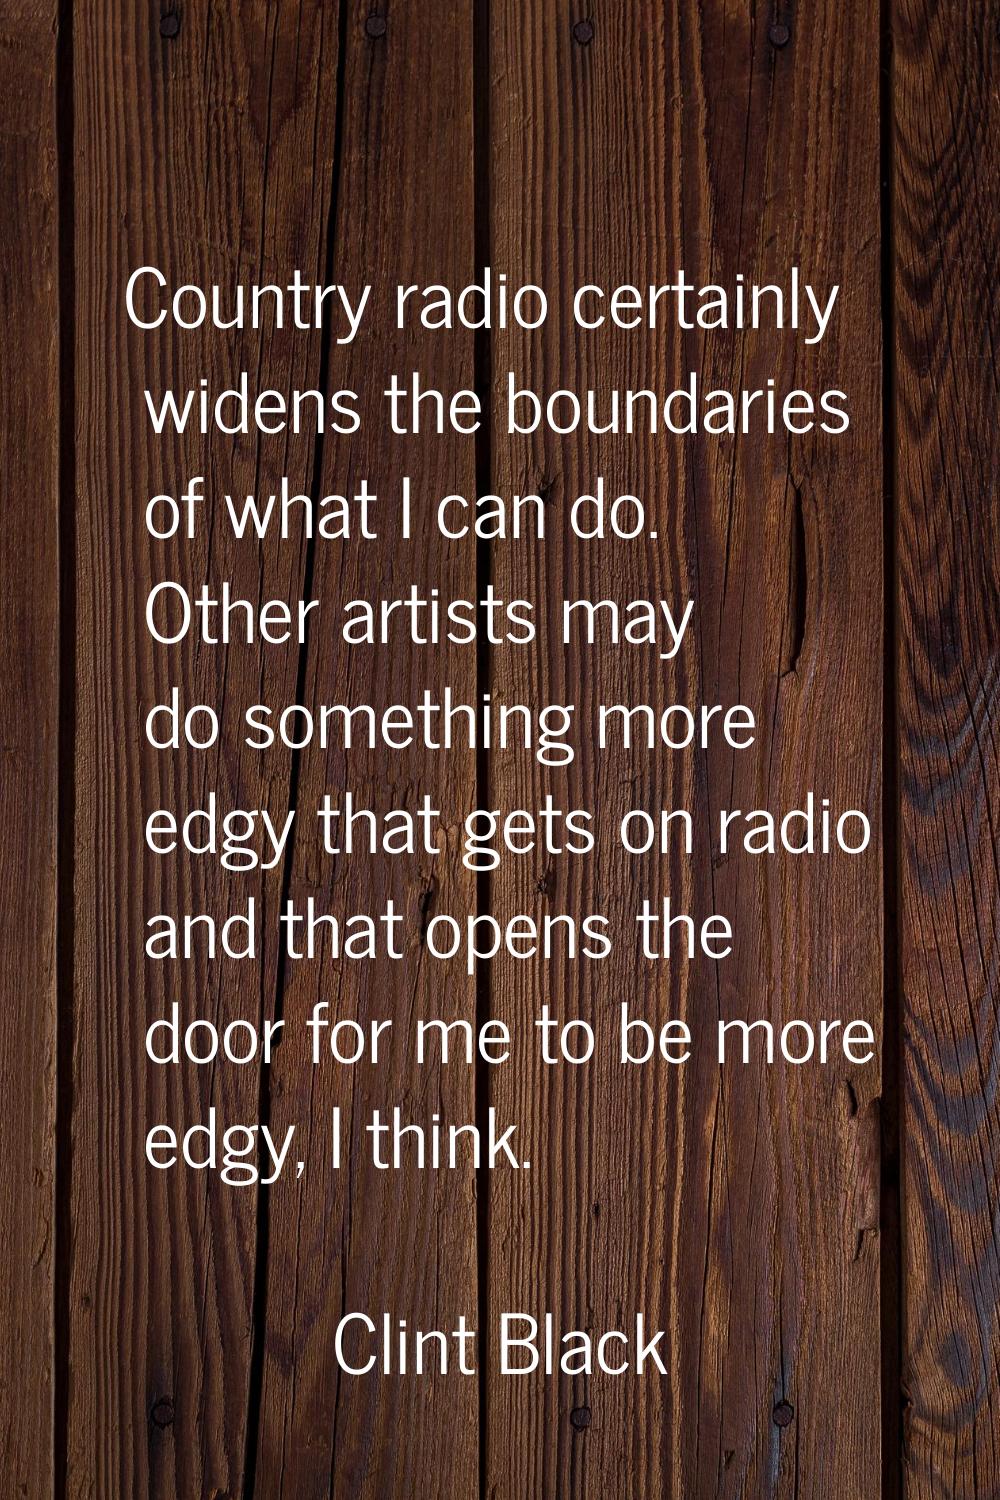 Country radio certainly widens the boundaries of what I can do. Other artists may do something more